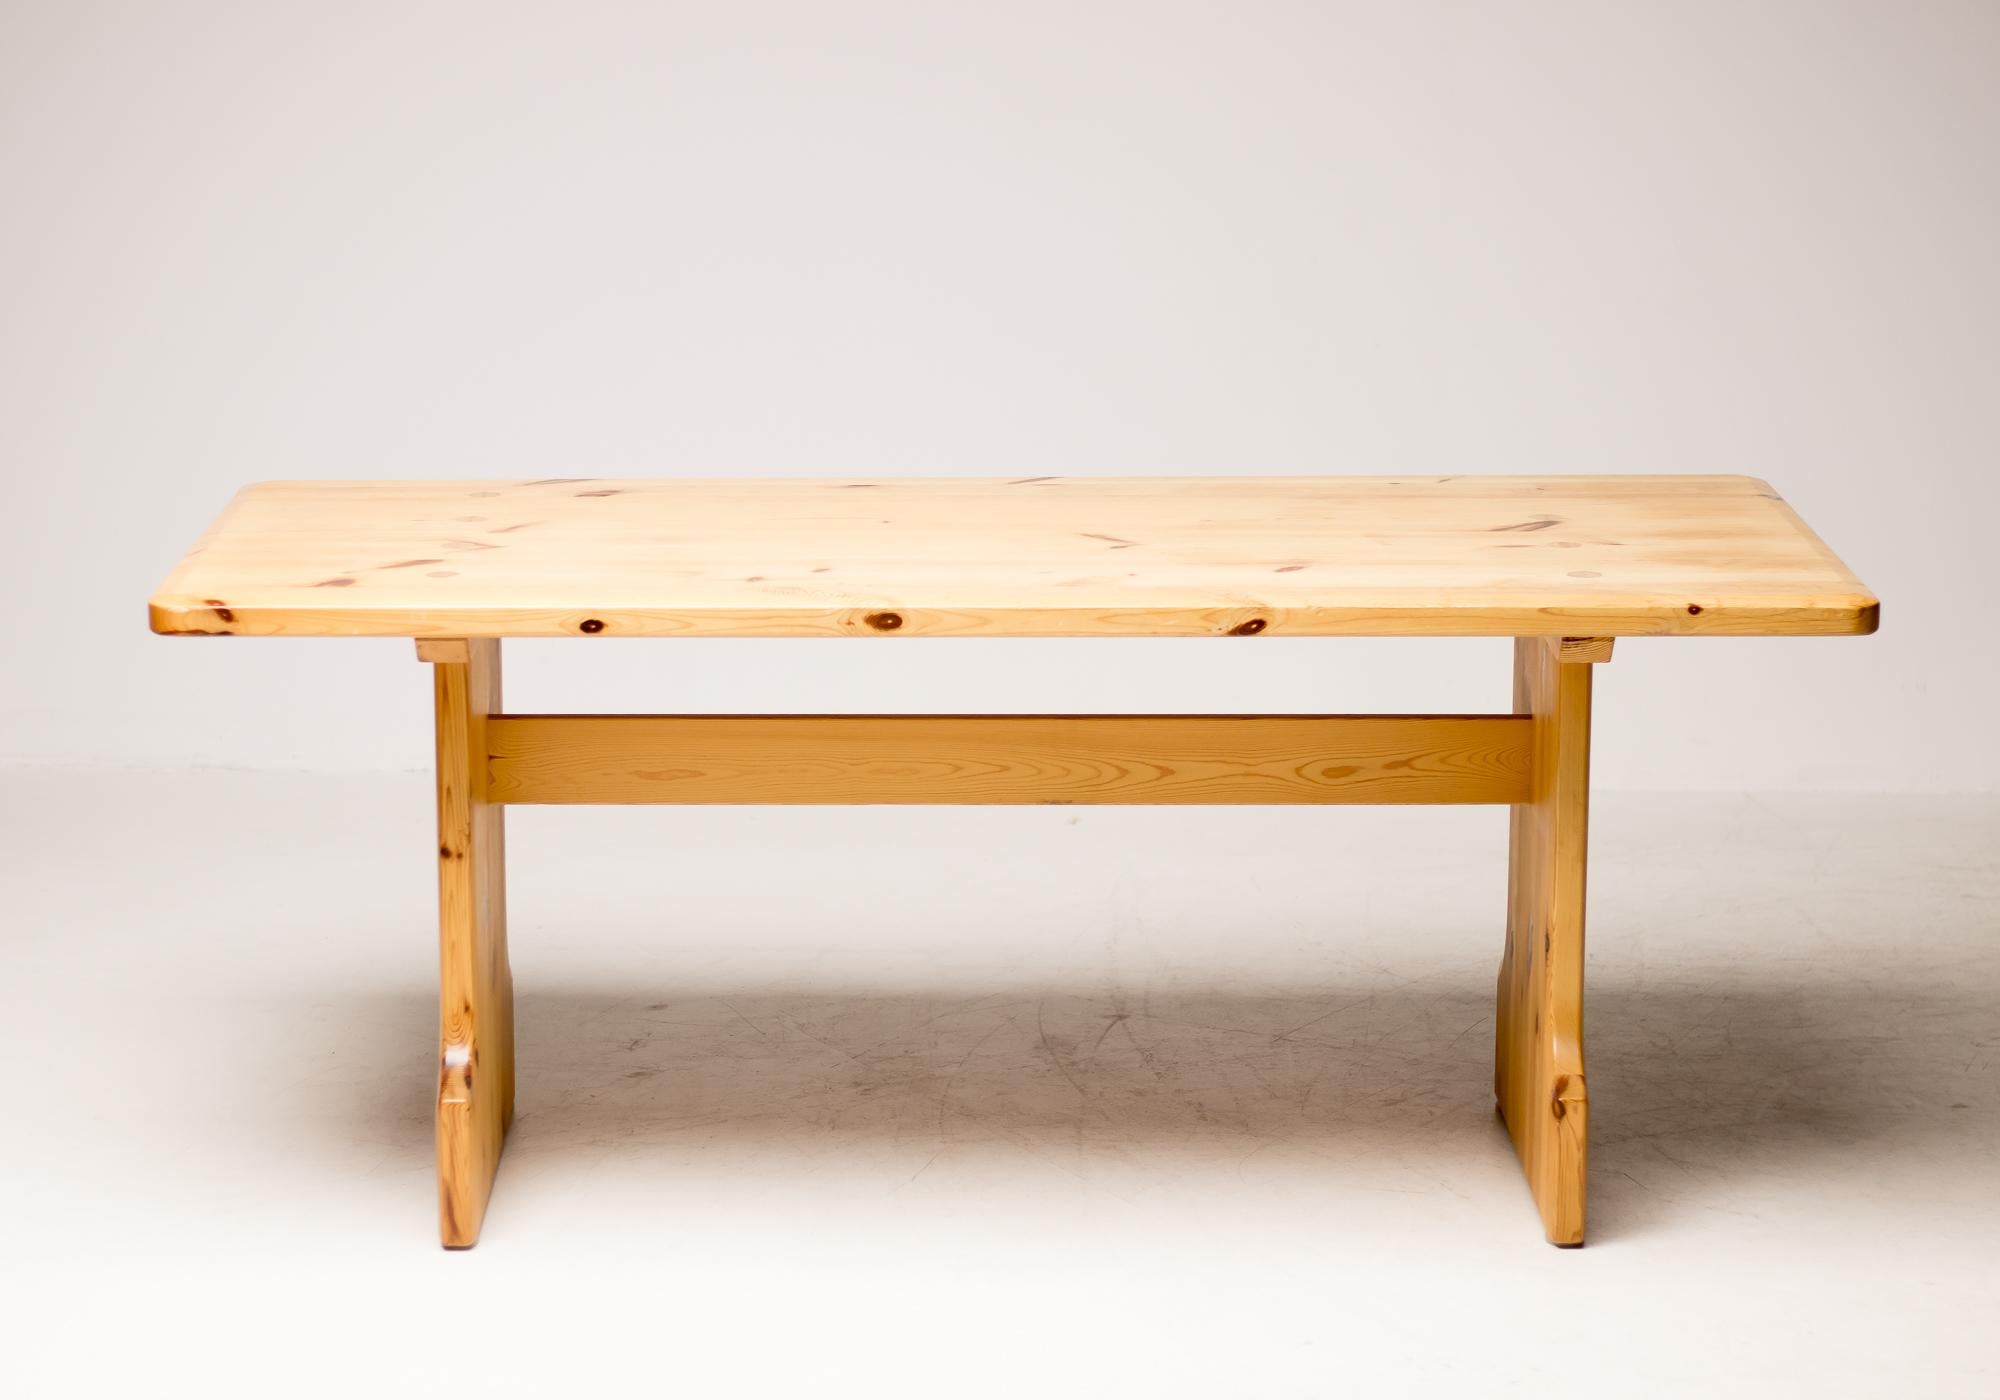 Mid-Century Modern solid pine dining table by Swedish company Karl Andersson and Söner, designed by Roland Wilhelmsson. The matching chairs are available separately.
This remarkable table has sophisticated woodworking details that are also present